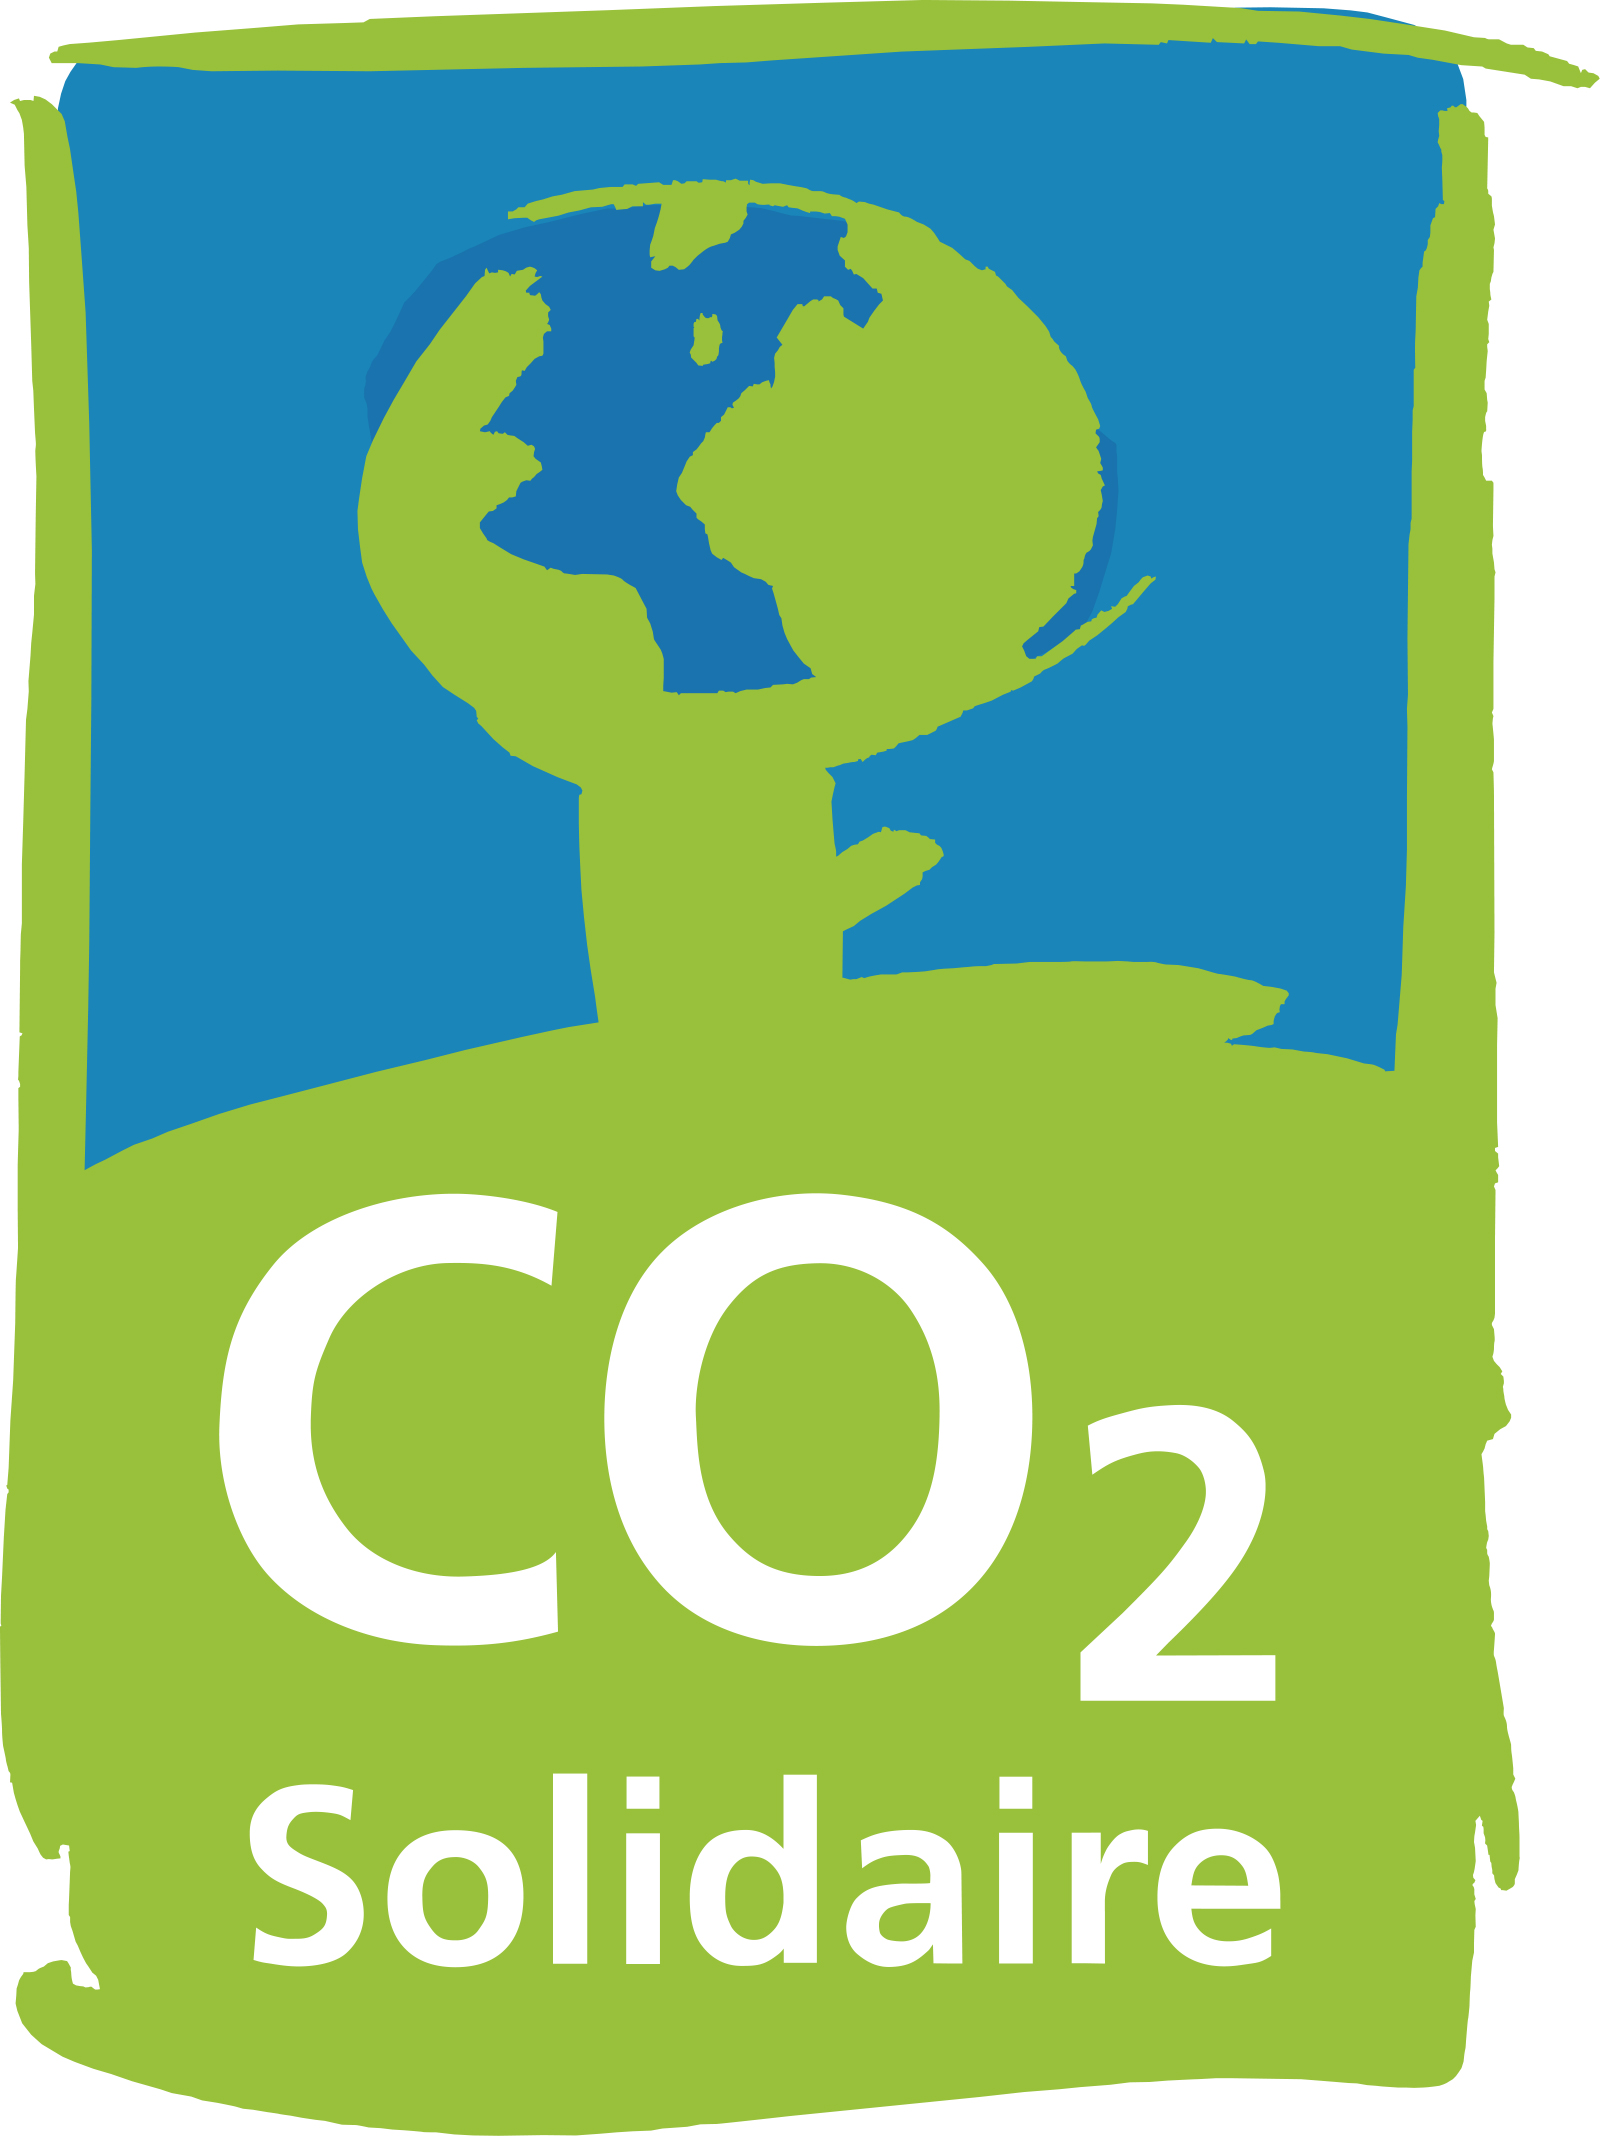 files/theme/contenus/articles/co2solidaire_300.jpg